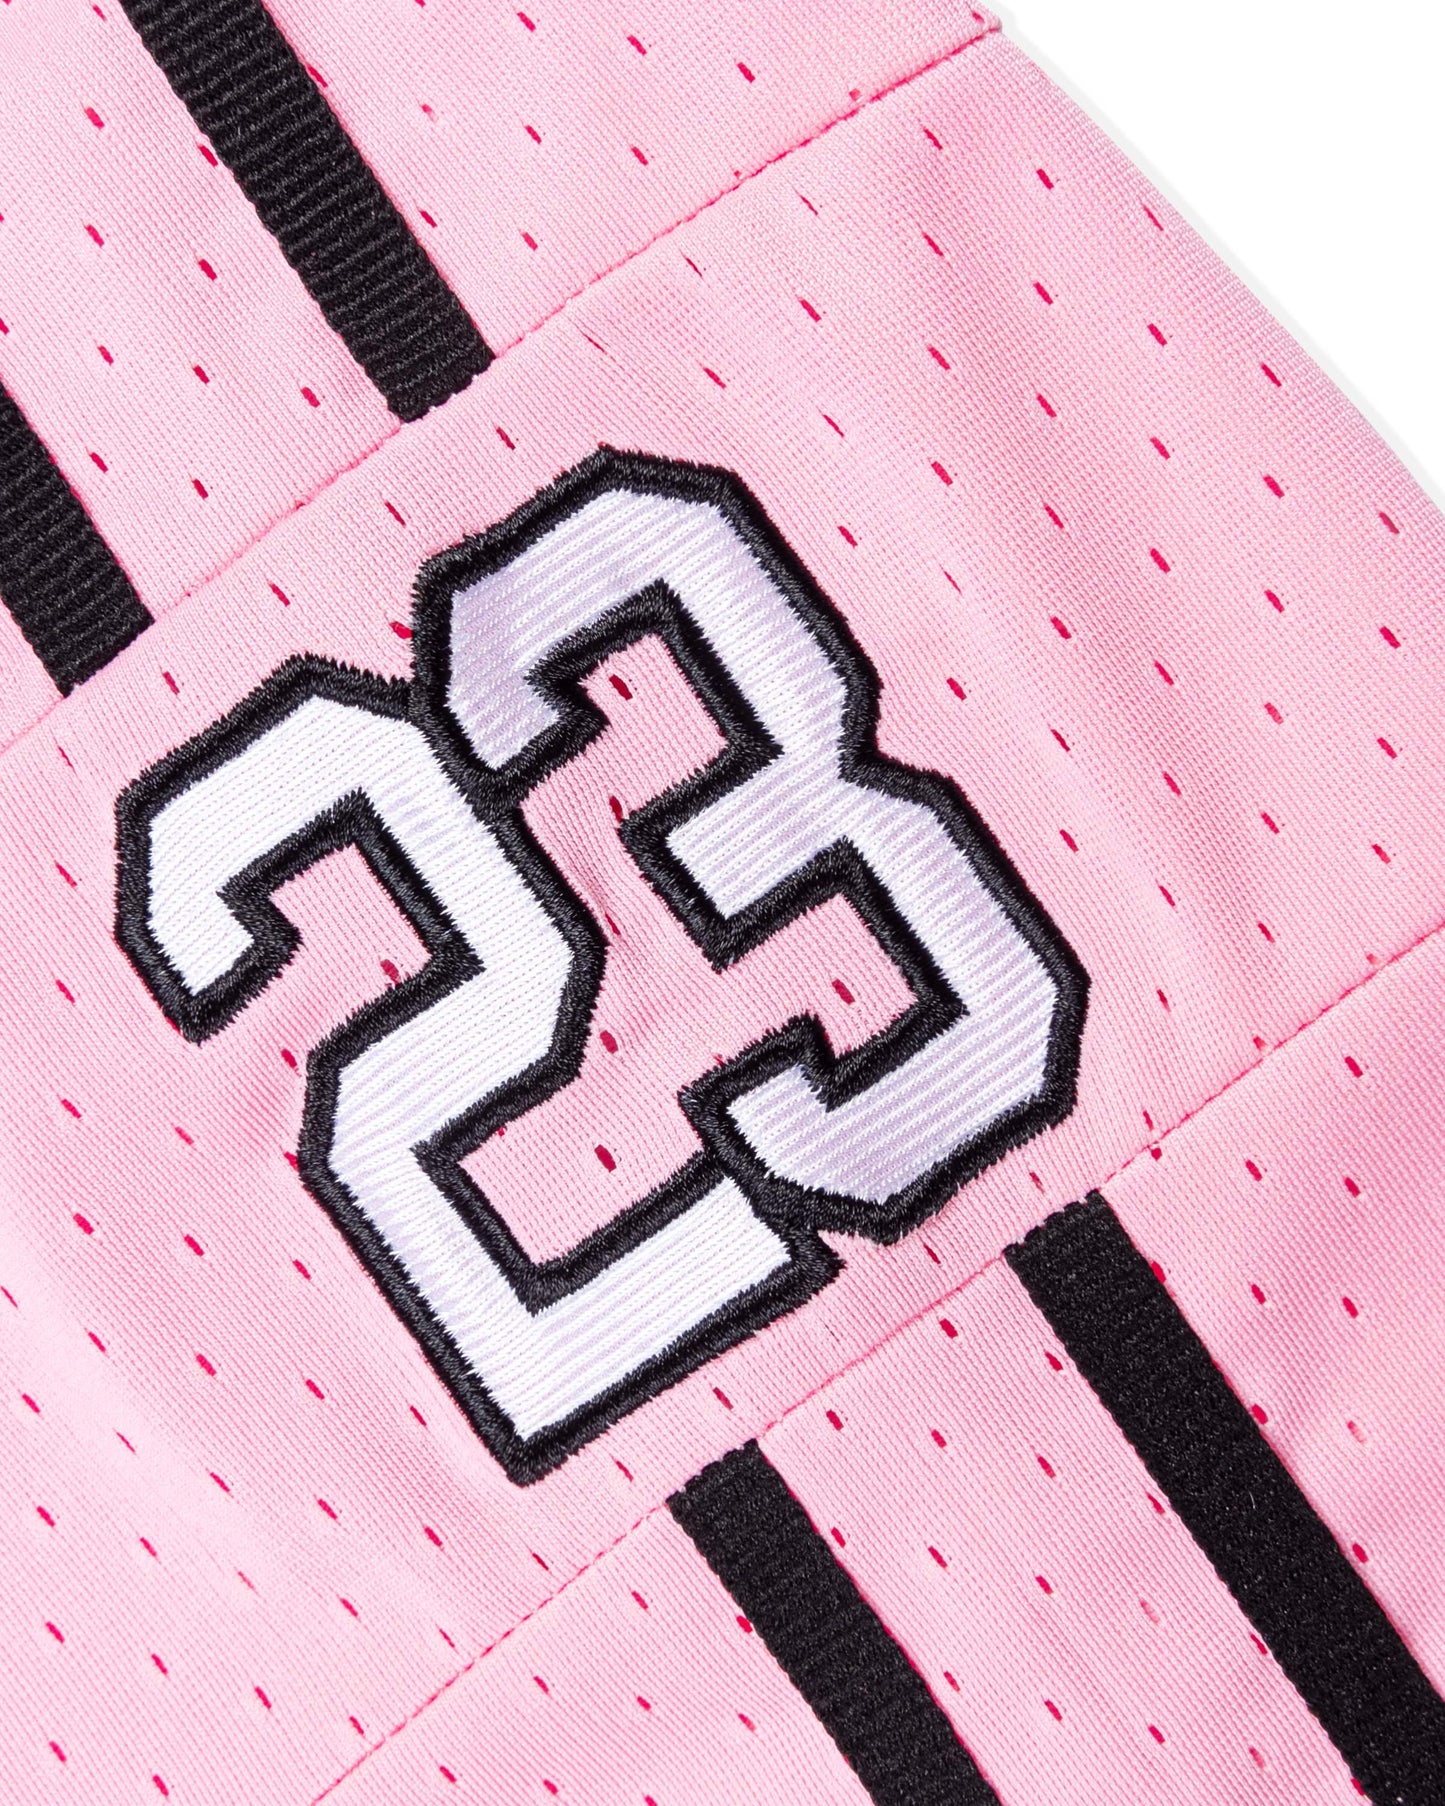 Levents® 23 Jersey/ Pink